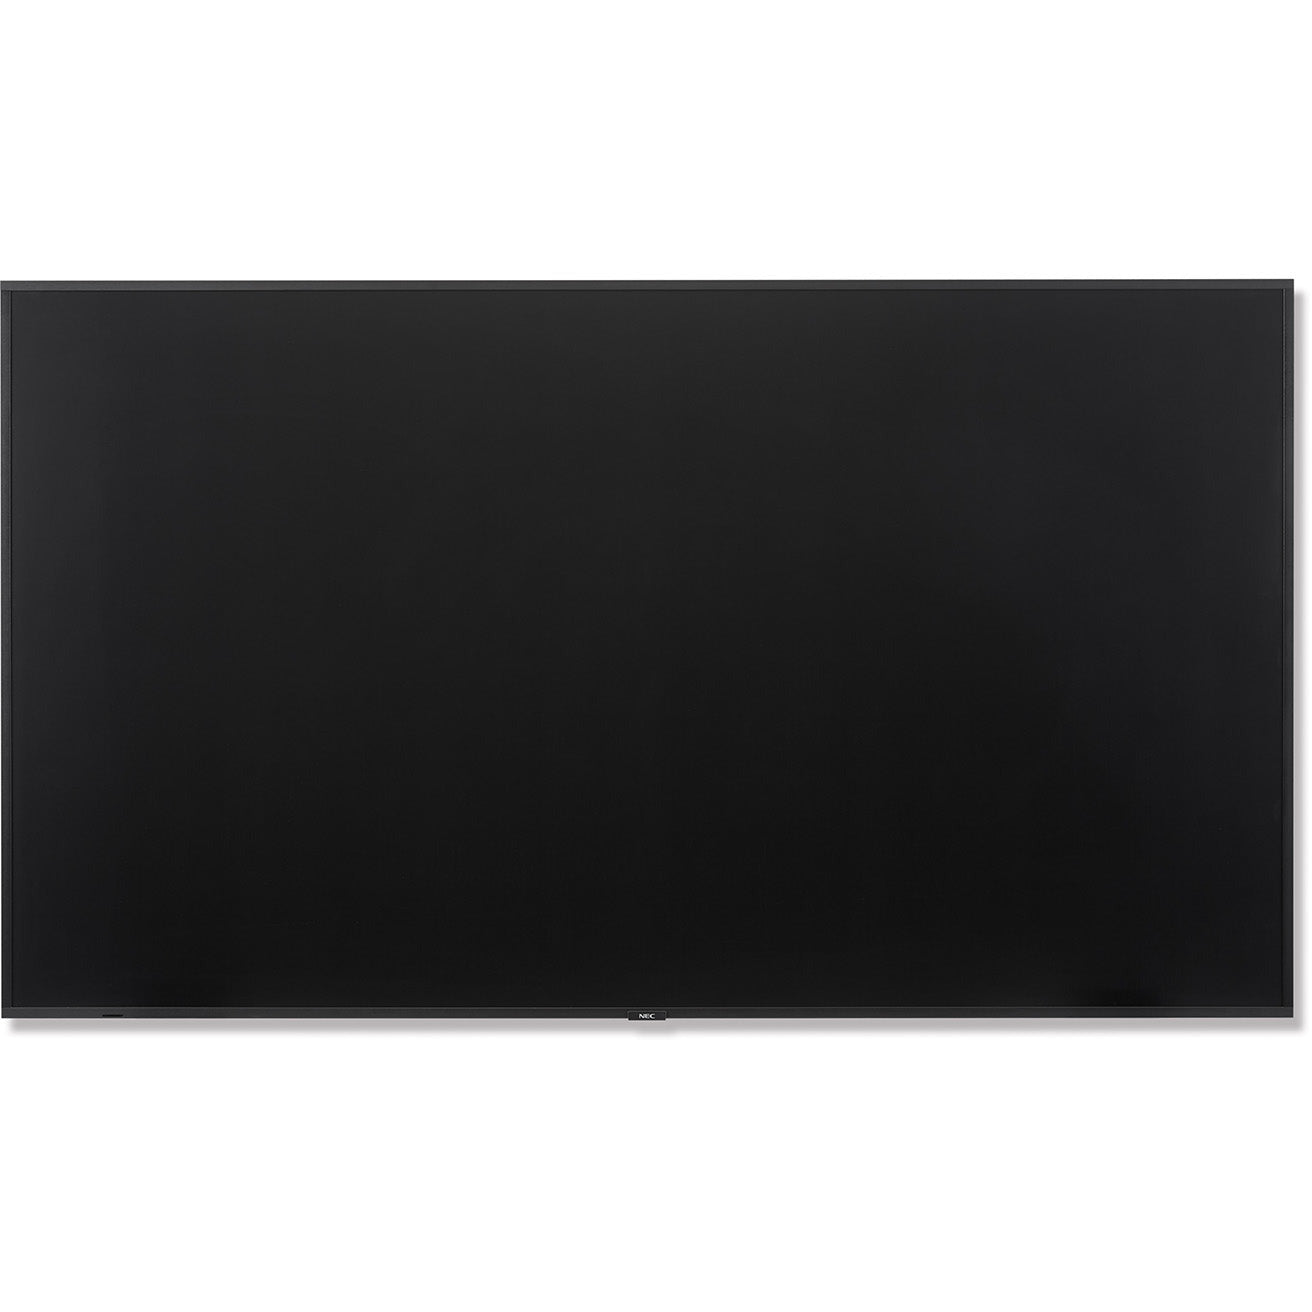 NEC MultiSync® M751 LCD 75" Message Large Format Display